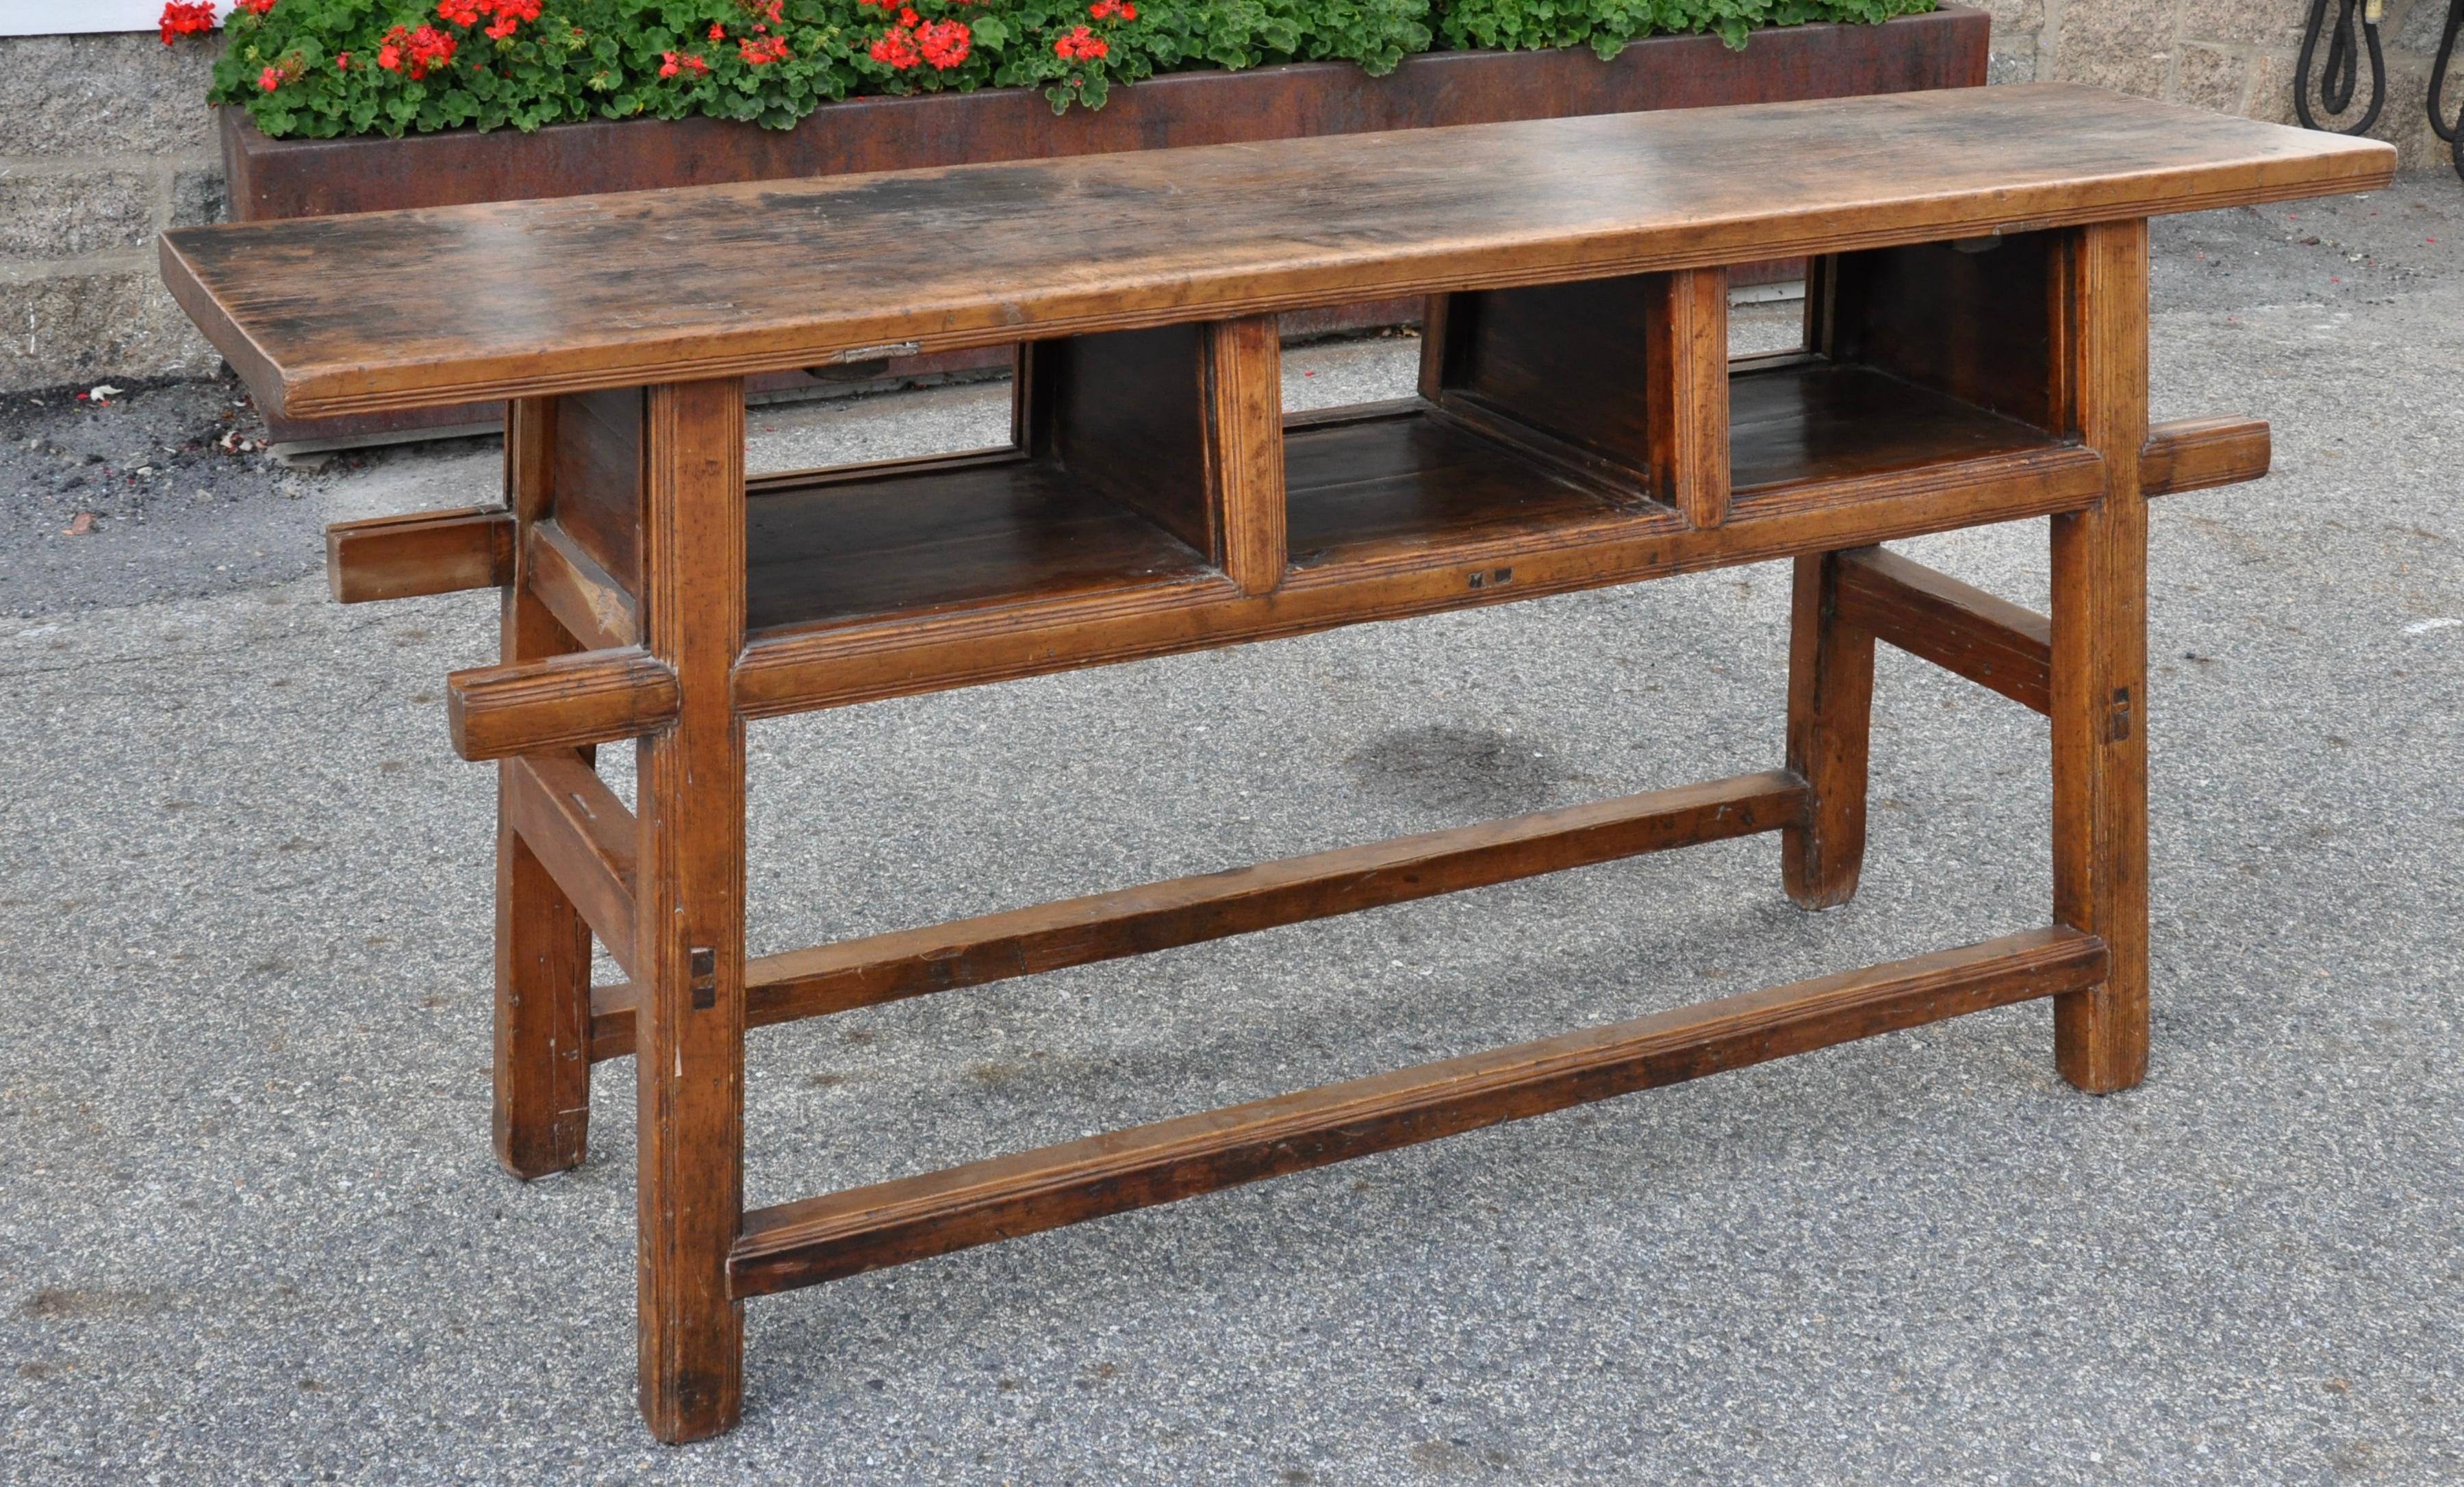 19th century Chinese farm or altar table, double sided with sliding lacquer panels and central lacquer drawer. Wonderful size to use as a server. Called a Dongbei in Northern China.

We are also showing this tenoned piece without its sliders and